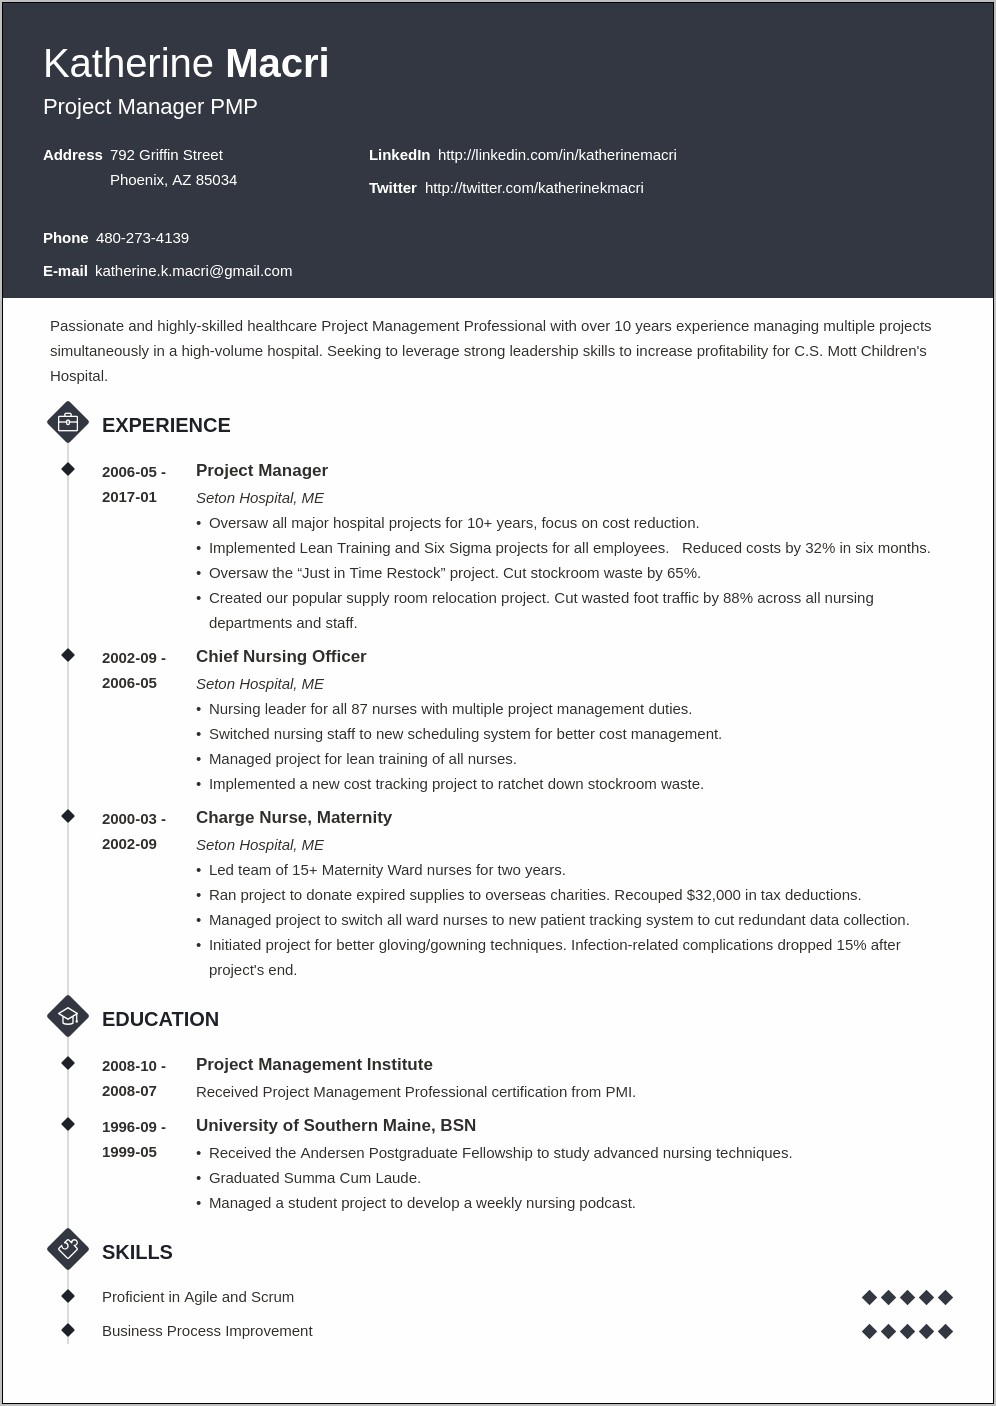 Resume Headline For Project Manager